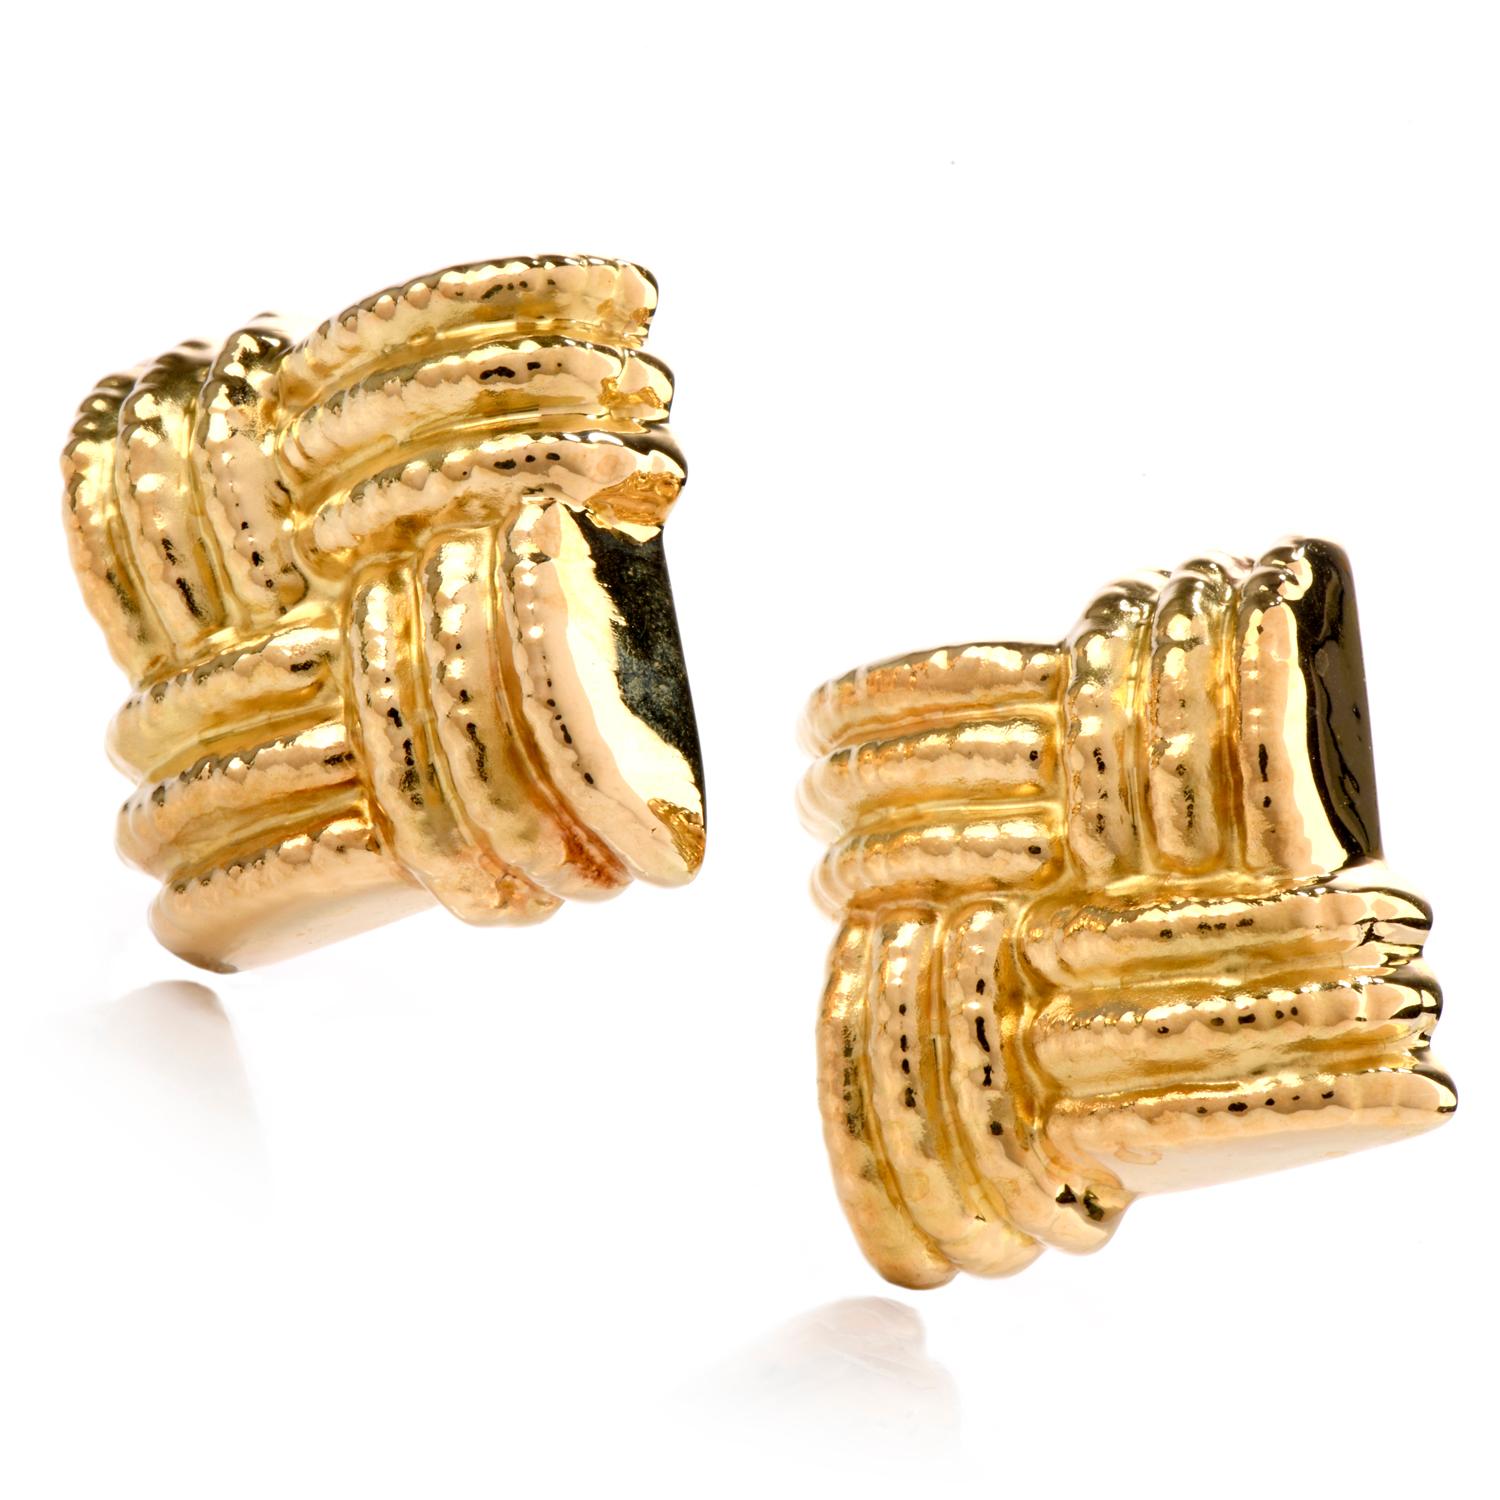 These large Nuovi Gioielli earrings were inspired in a  criss cross motif and crafted in 18K gold.

Applied hammered texture is present throughout these chic Squre earrings.
Secure with post and clip backs.

weight: 23.5 grams

Stamped